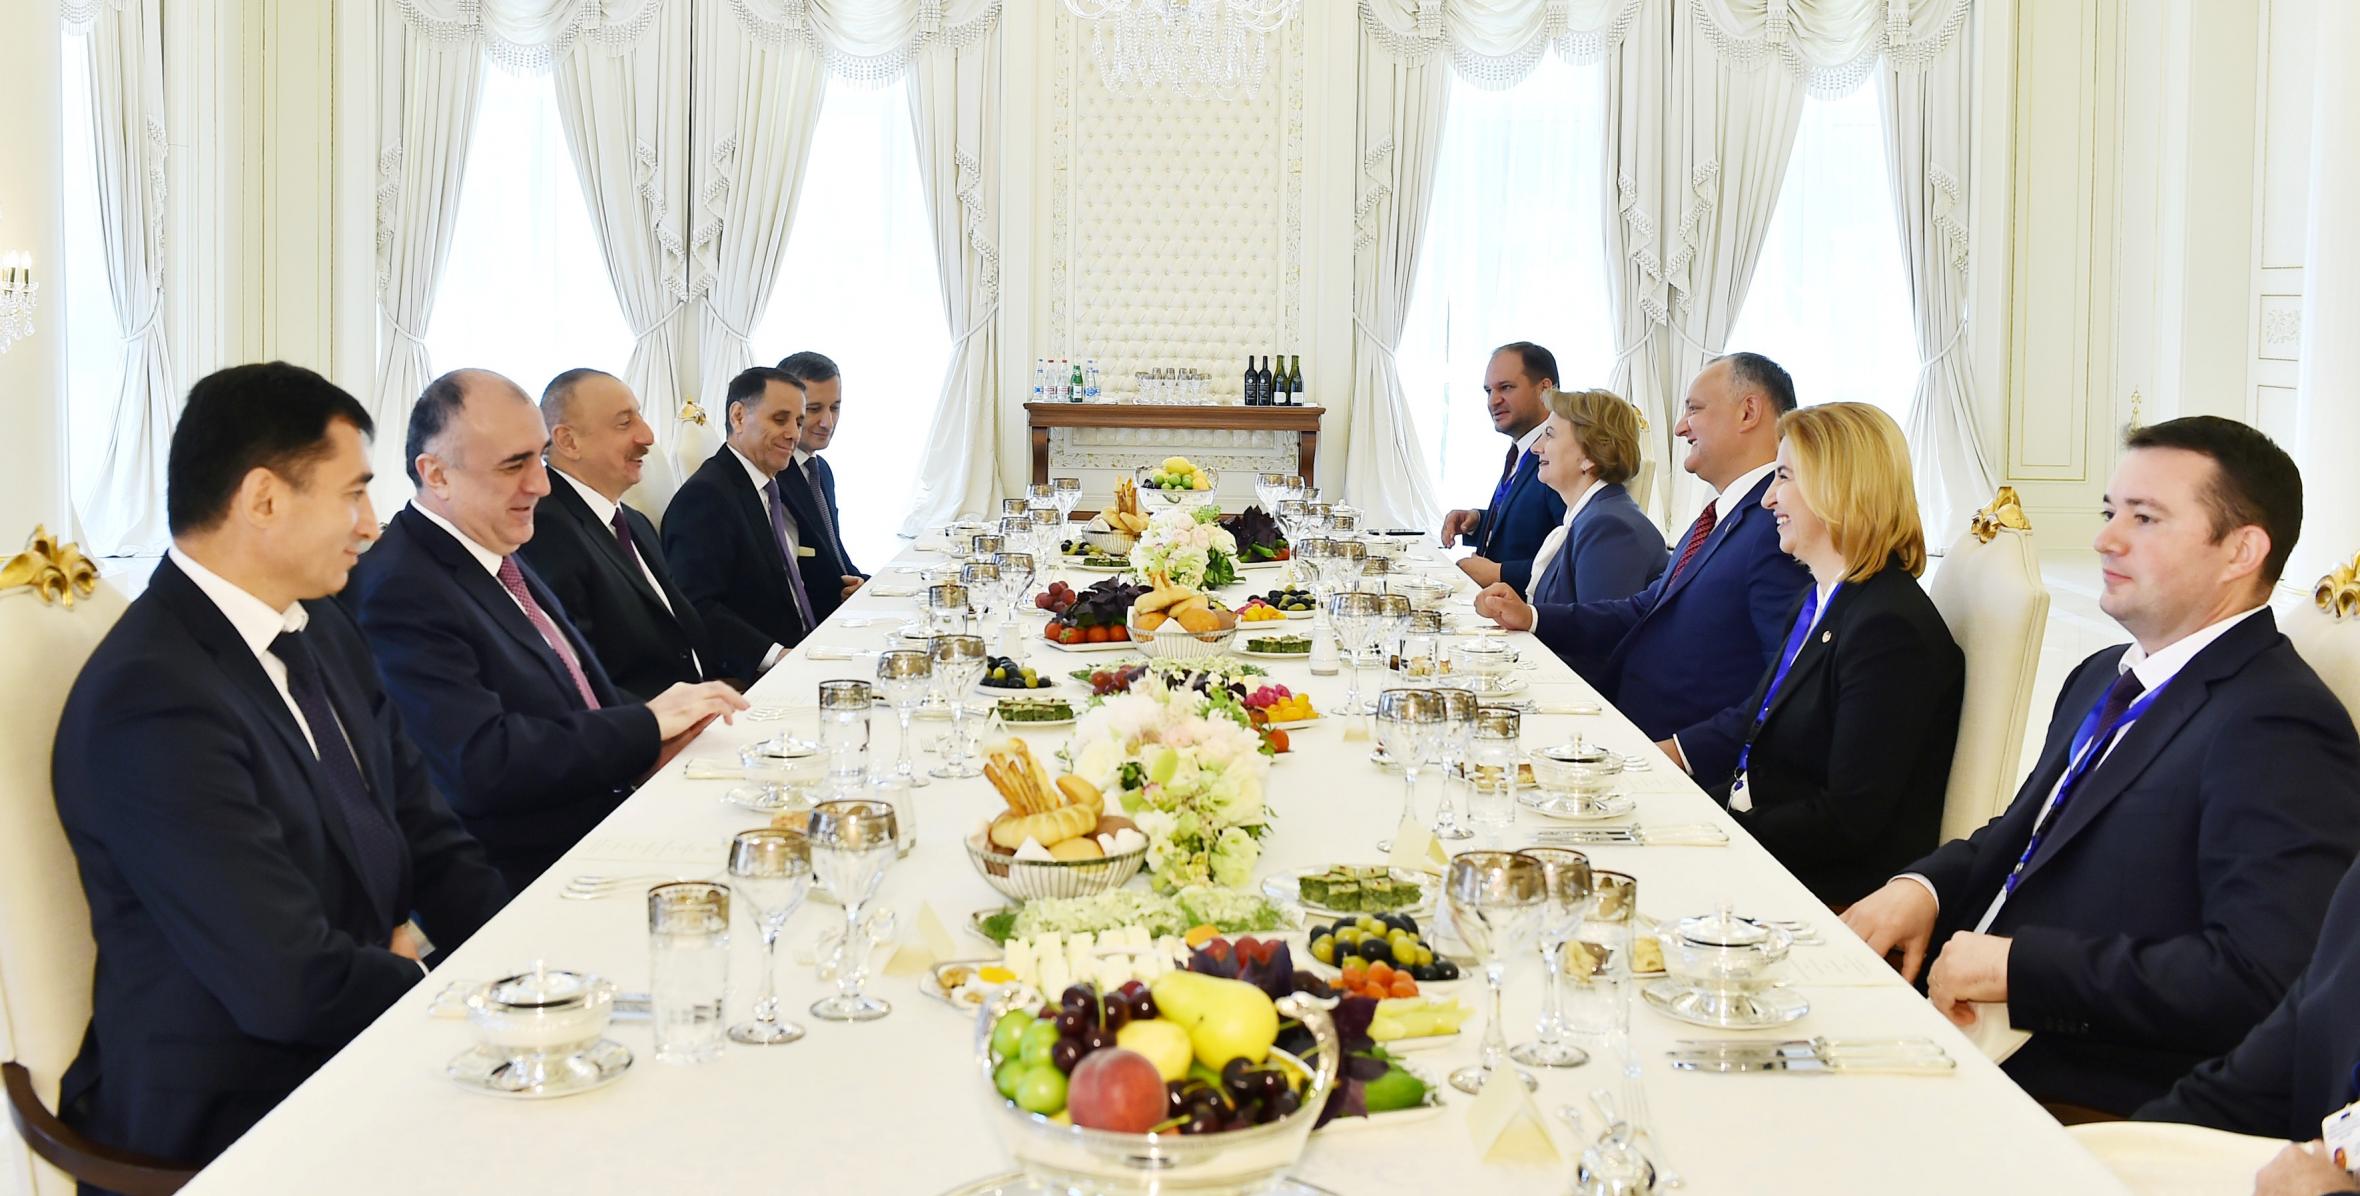 Ilham Aliyev hosted official dinner reception in honor of Moldovan President